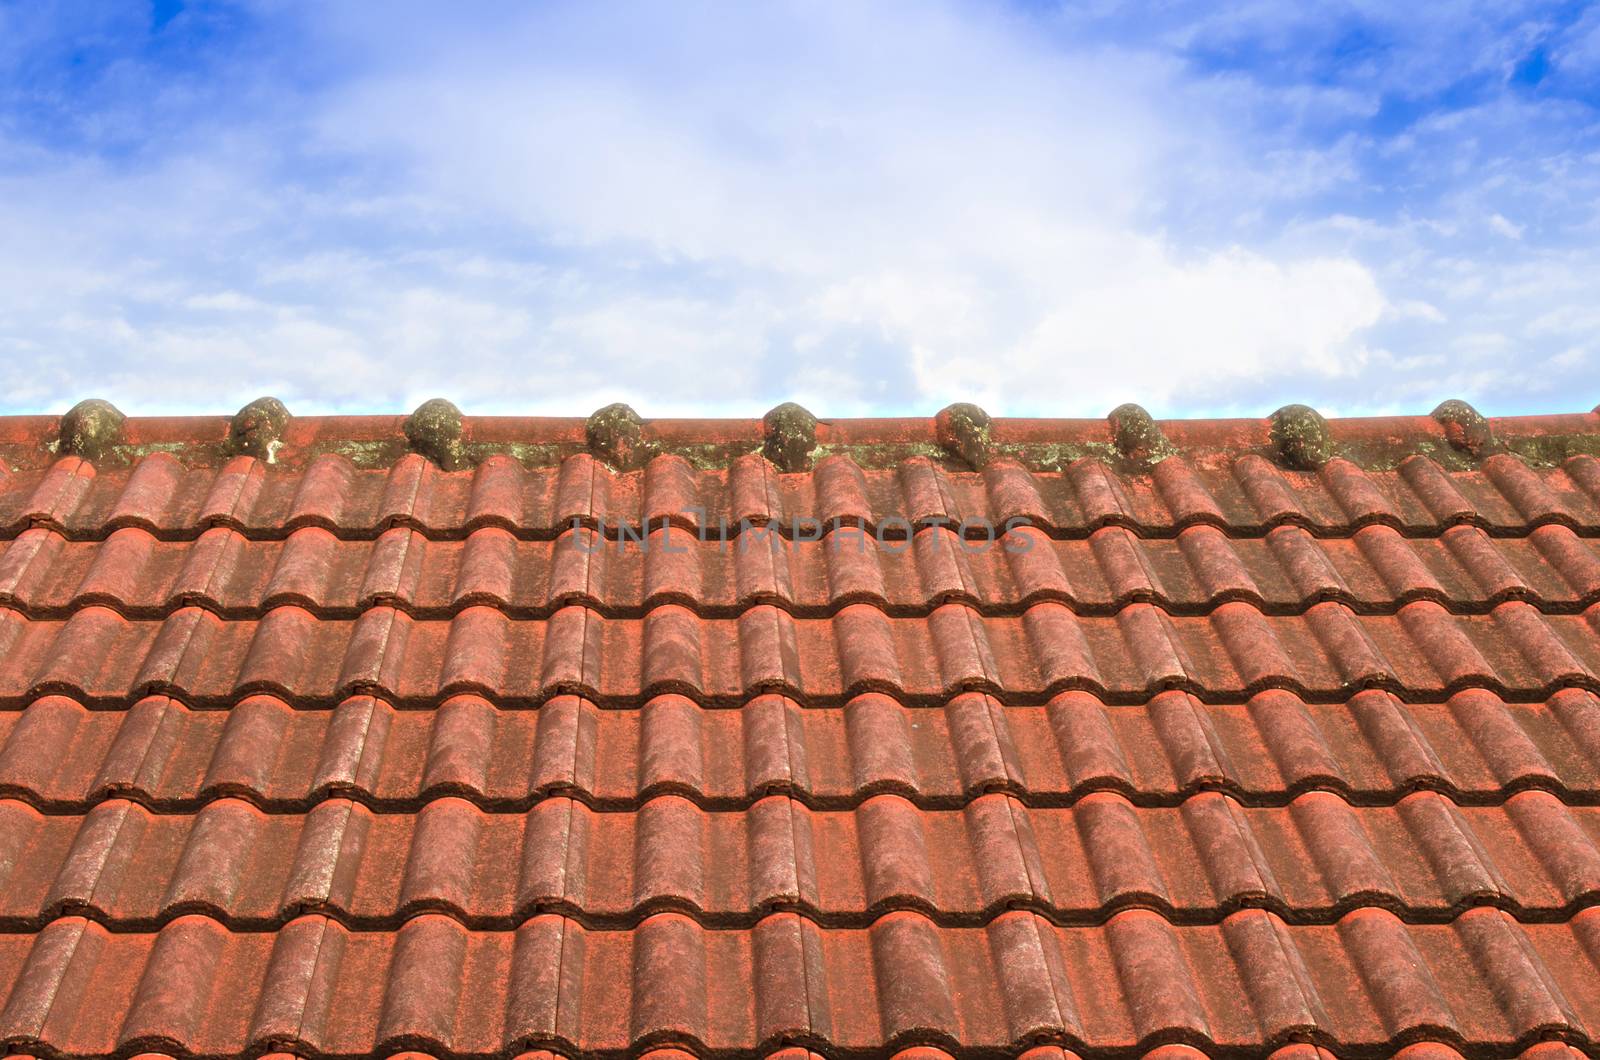 The Tiled Roof with Fluffy Cloud Blue Sky